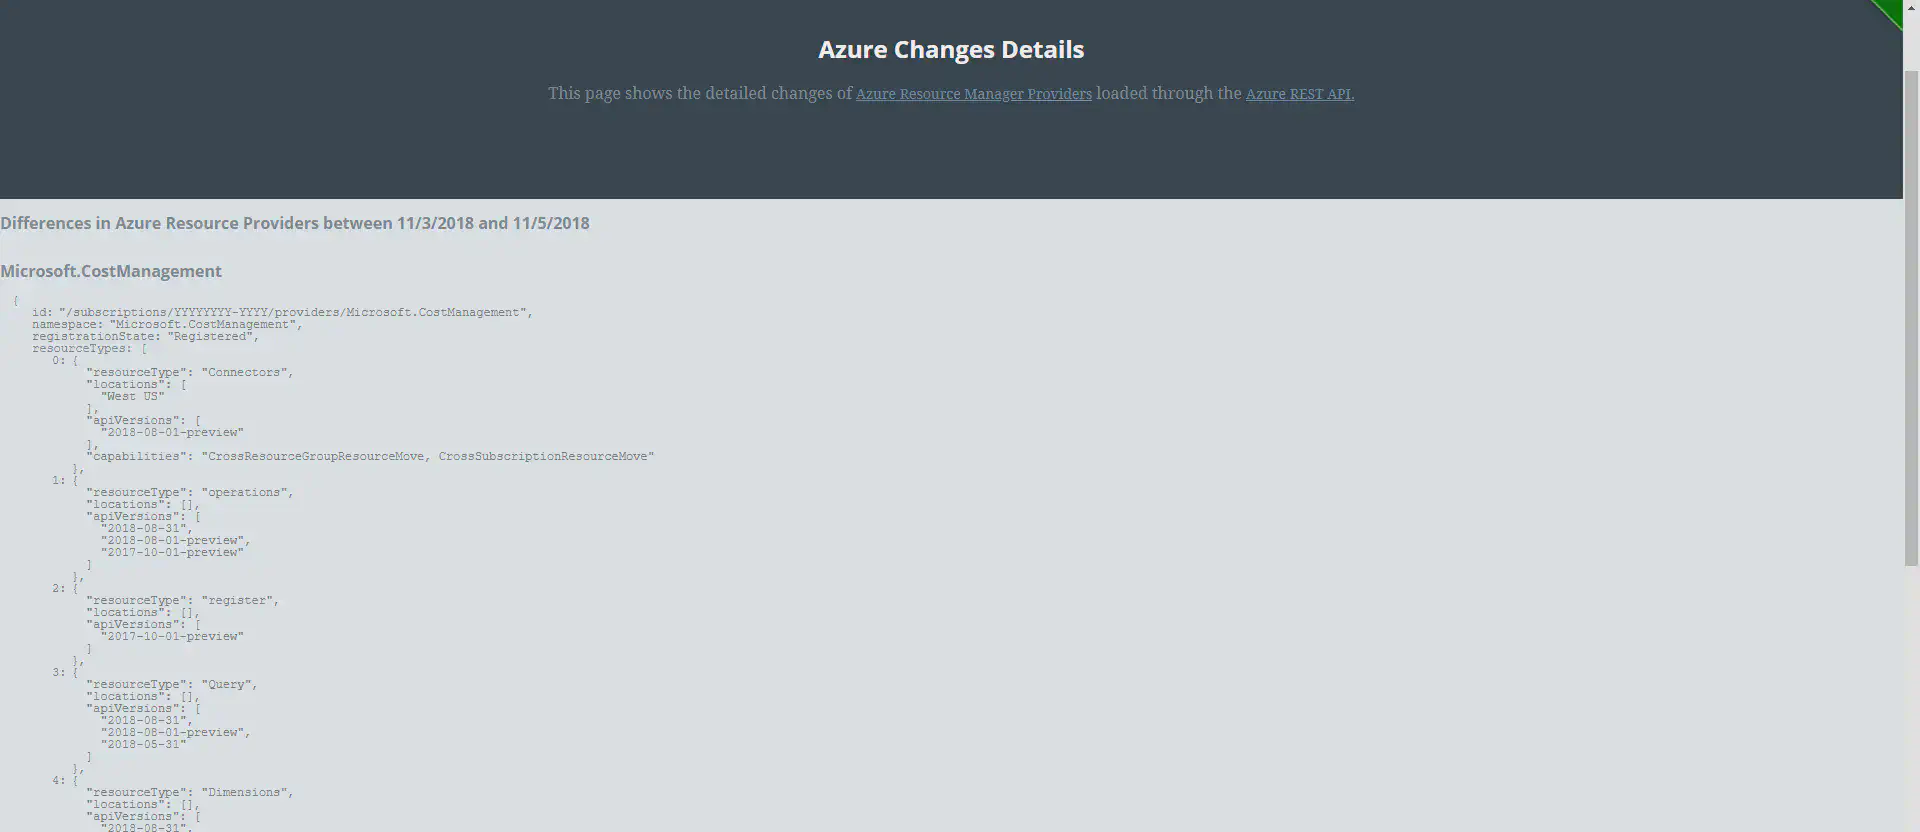 Tracking changes to Azure Resource Manager providers